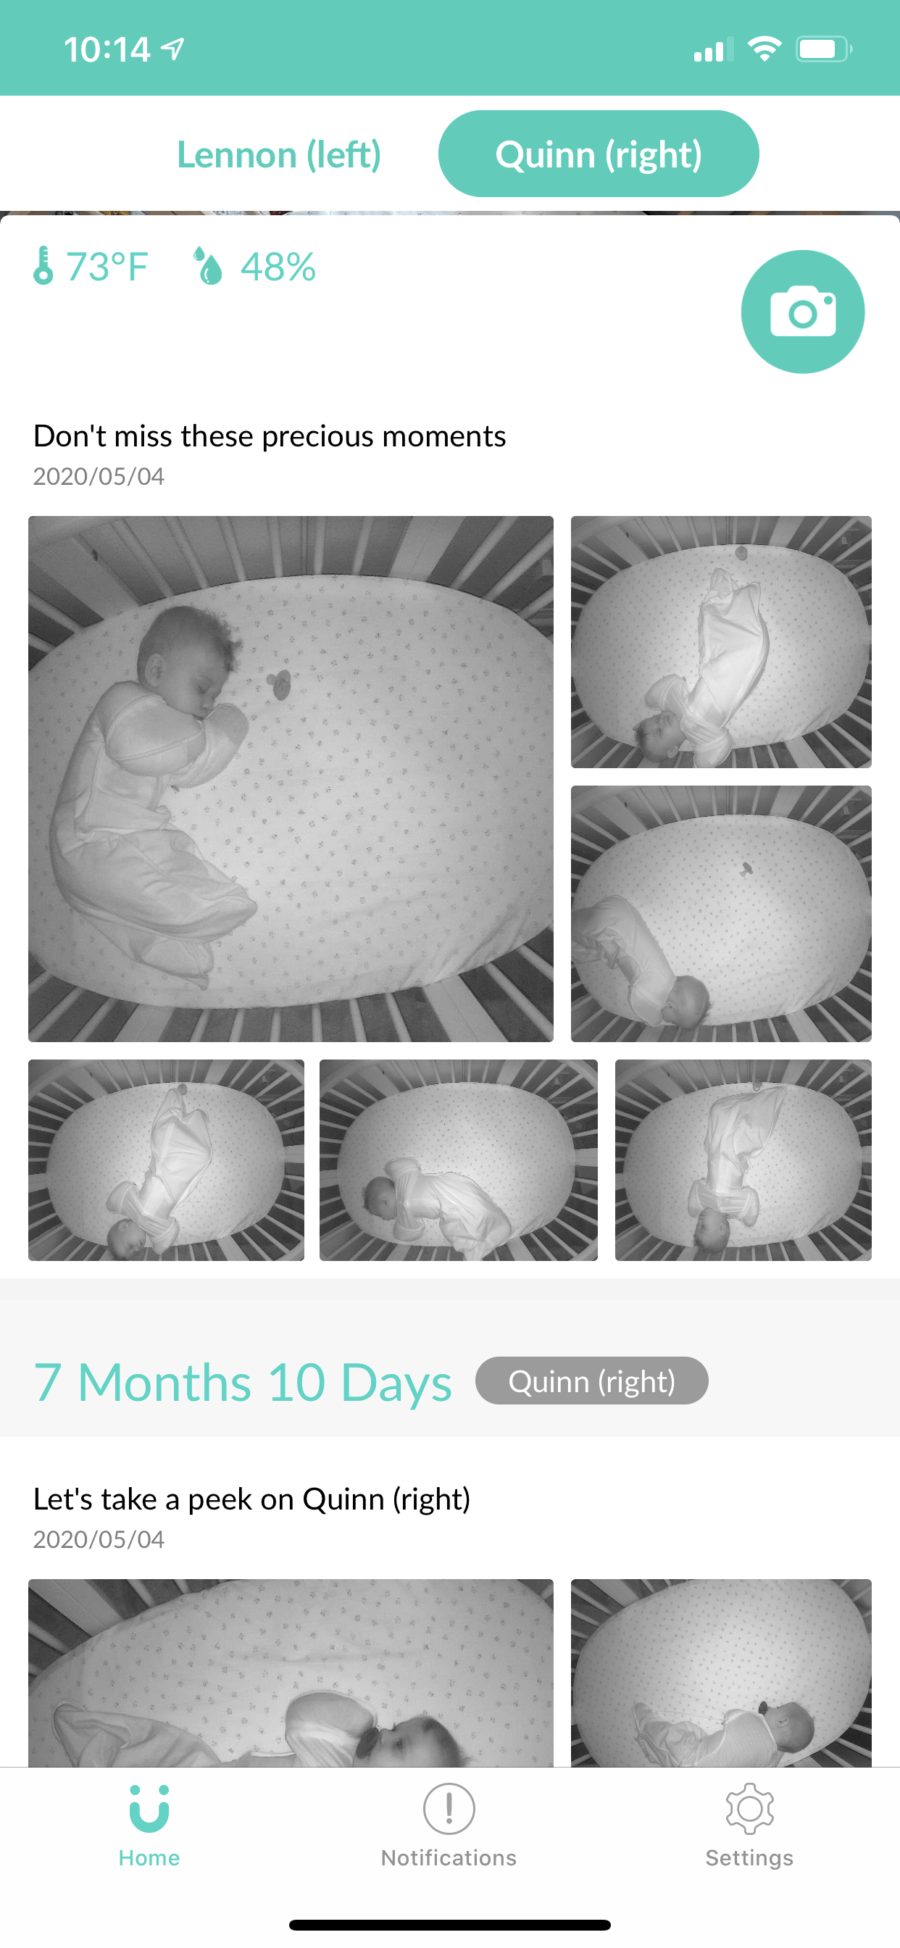 Screen capture of Cubo Ai Smart Baby Monitor in use. Automatic image capture from the Cubo Ai Smart Baby Monitor. The Best Baby Monitor for Twins - Cubo Ai Smart Baby Monitor Review | Best Baby Monitor by popular Florida motherhood blog, Fresh Mommy Blog: image of the Cubo Ai app. 